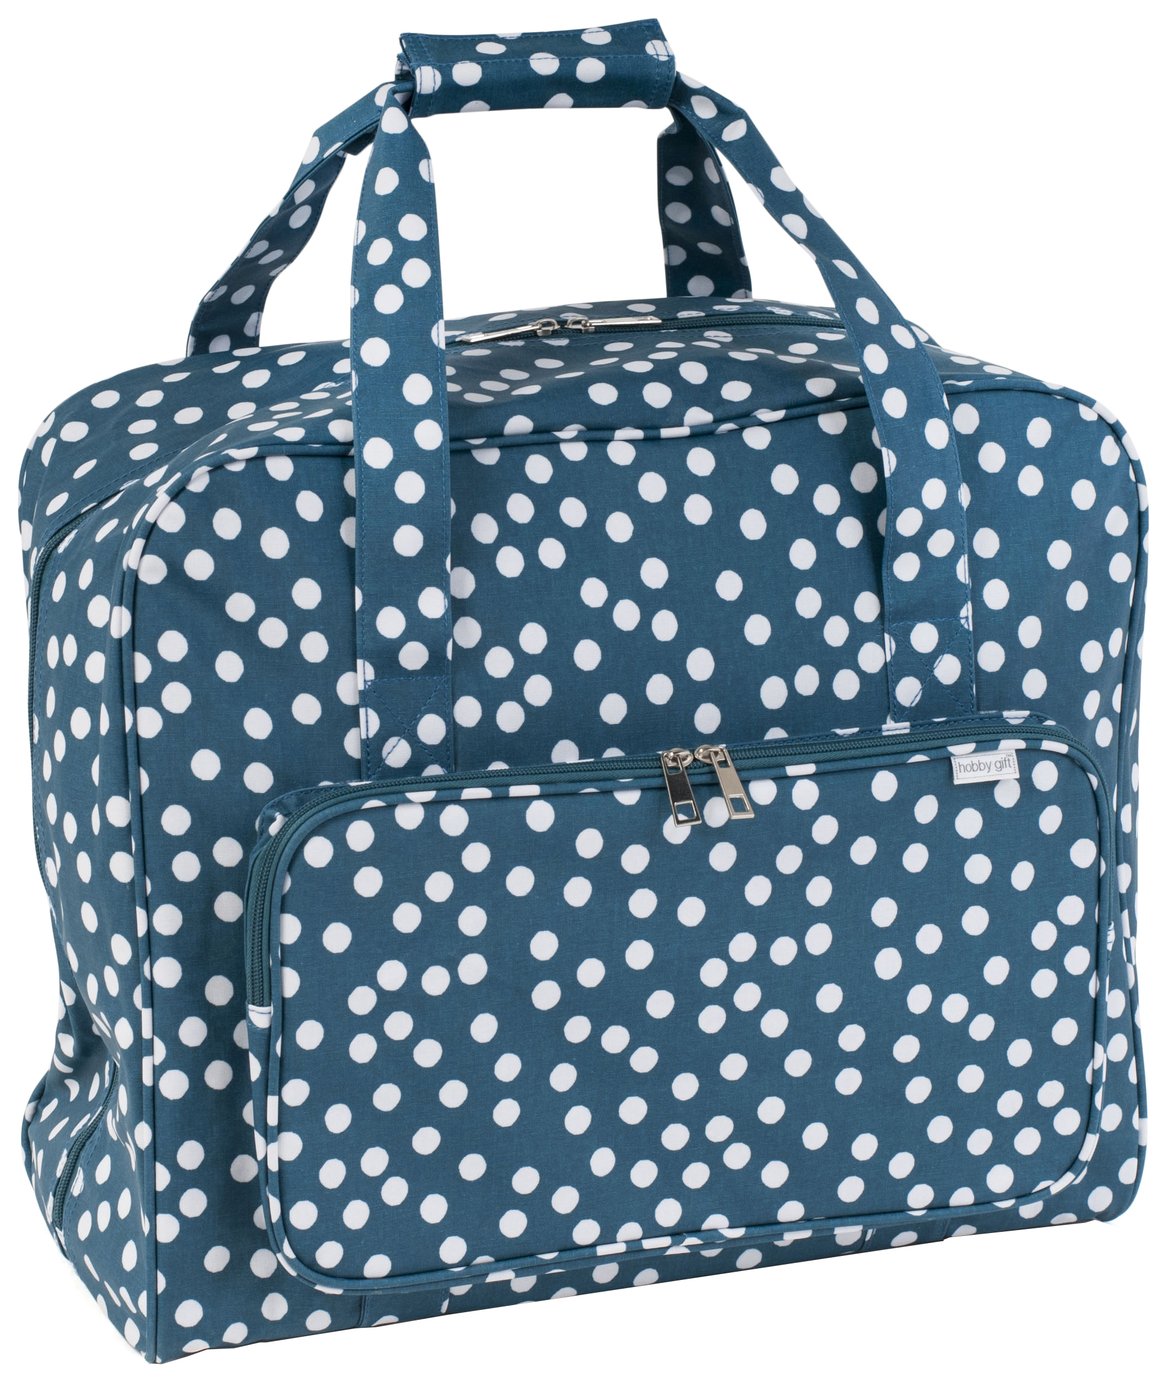 Hobby Gift Sewing Machine Carry Bag - Teal